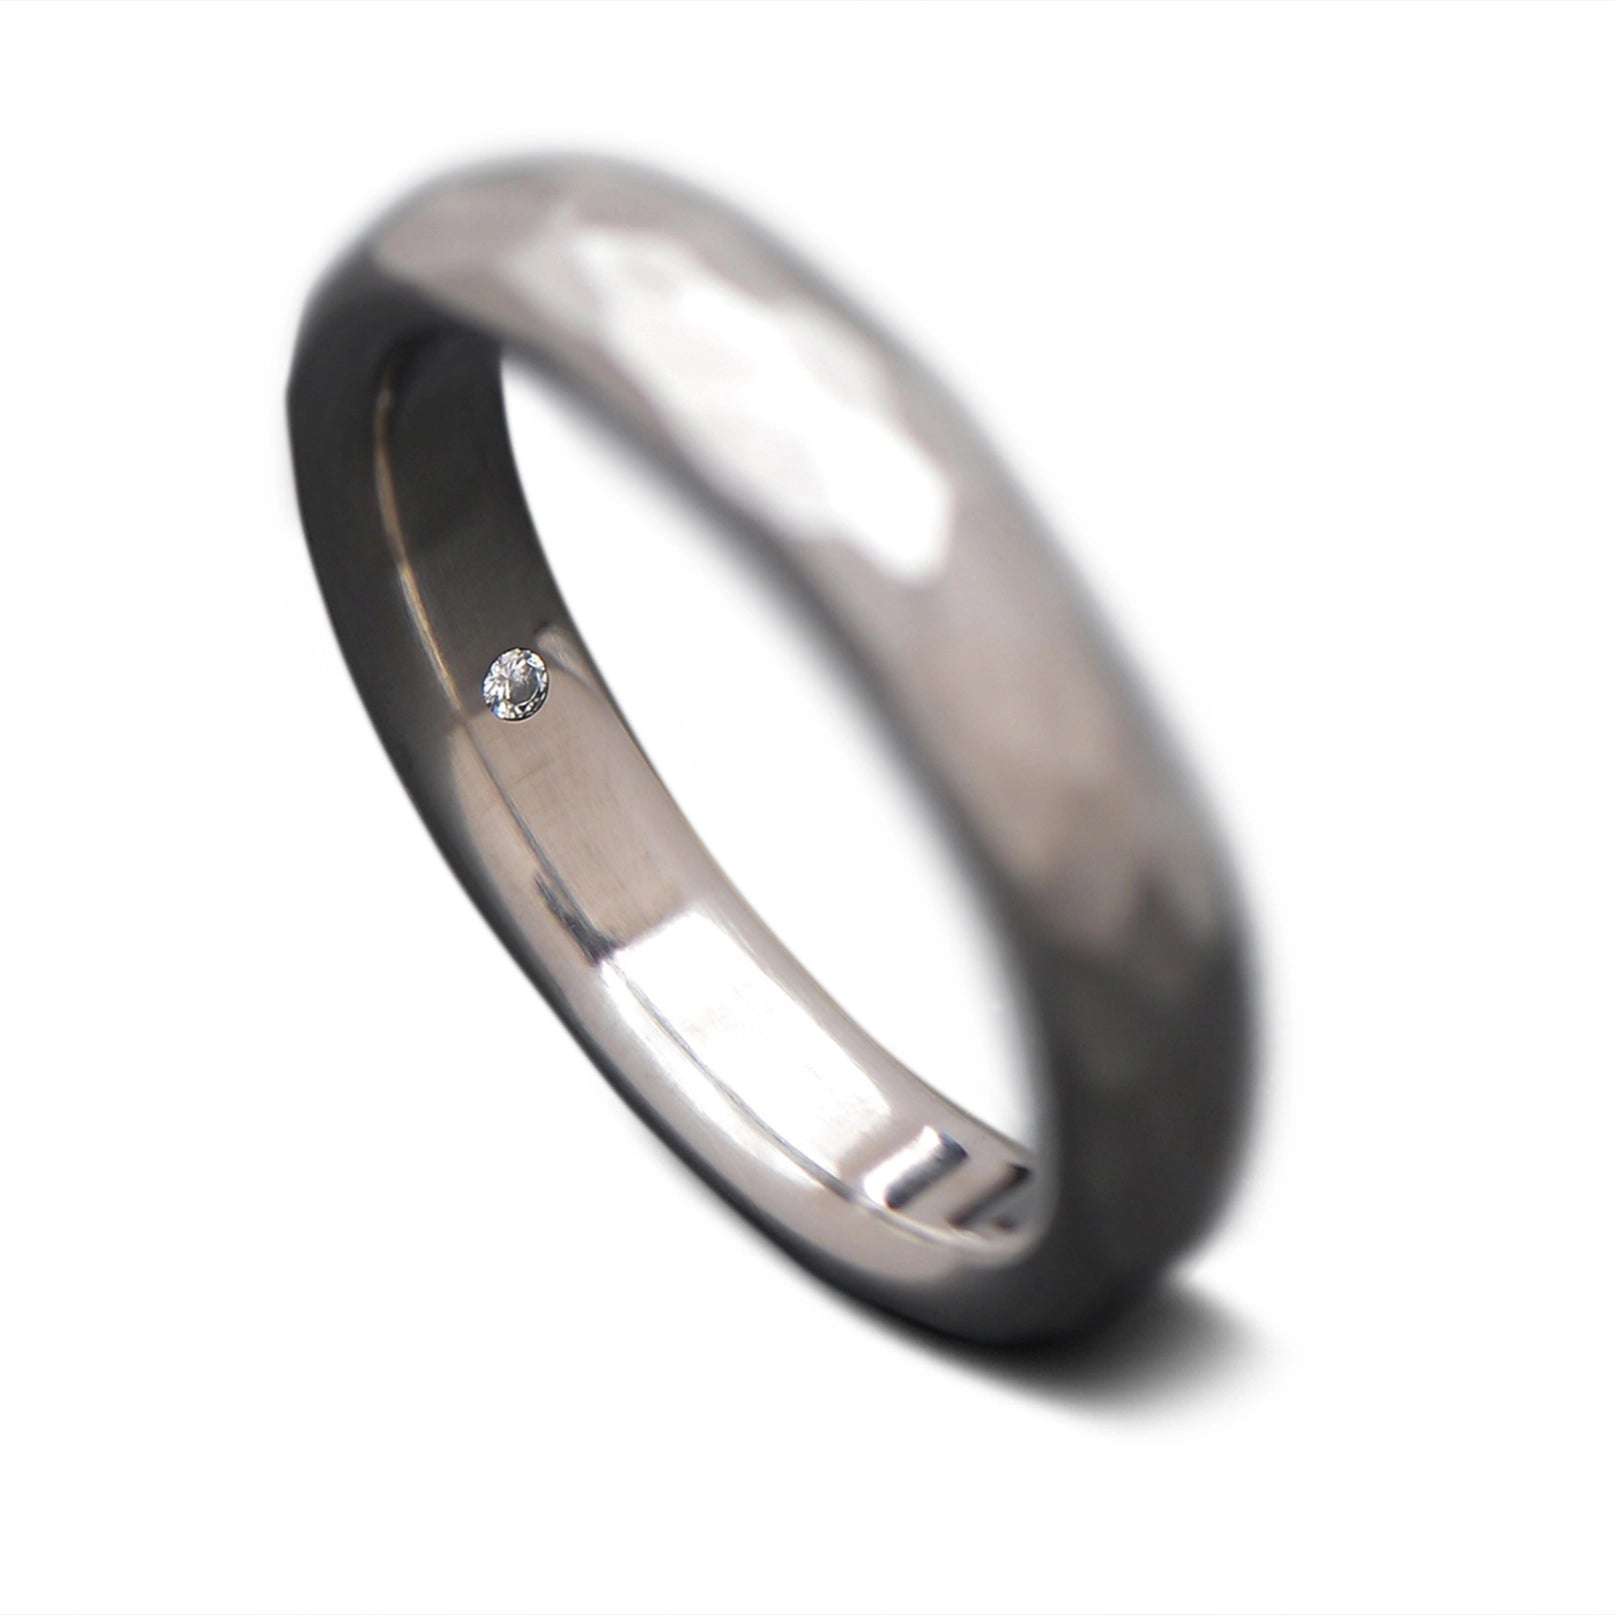 Back of Titanium Core slim ring with Domed, Flat profile and  Faceted, polished finish, 4mm -THE TITAN